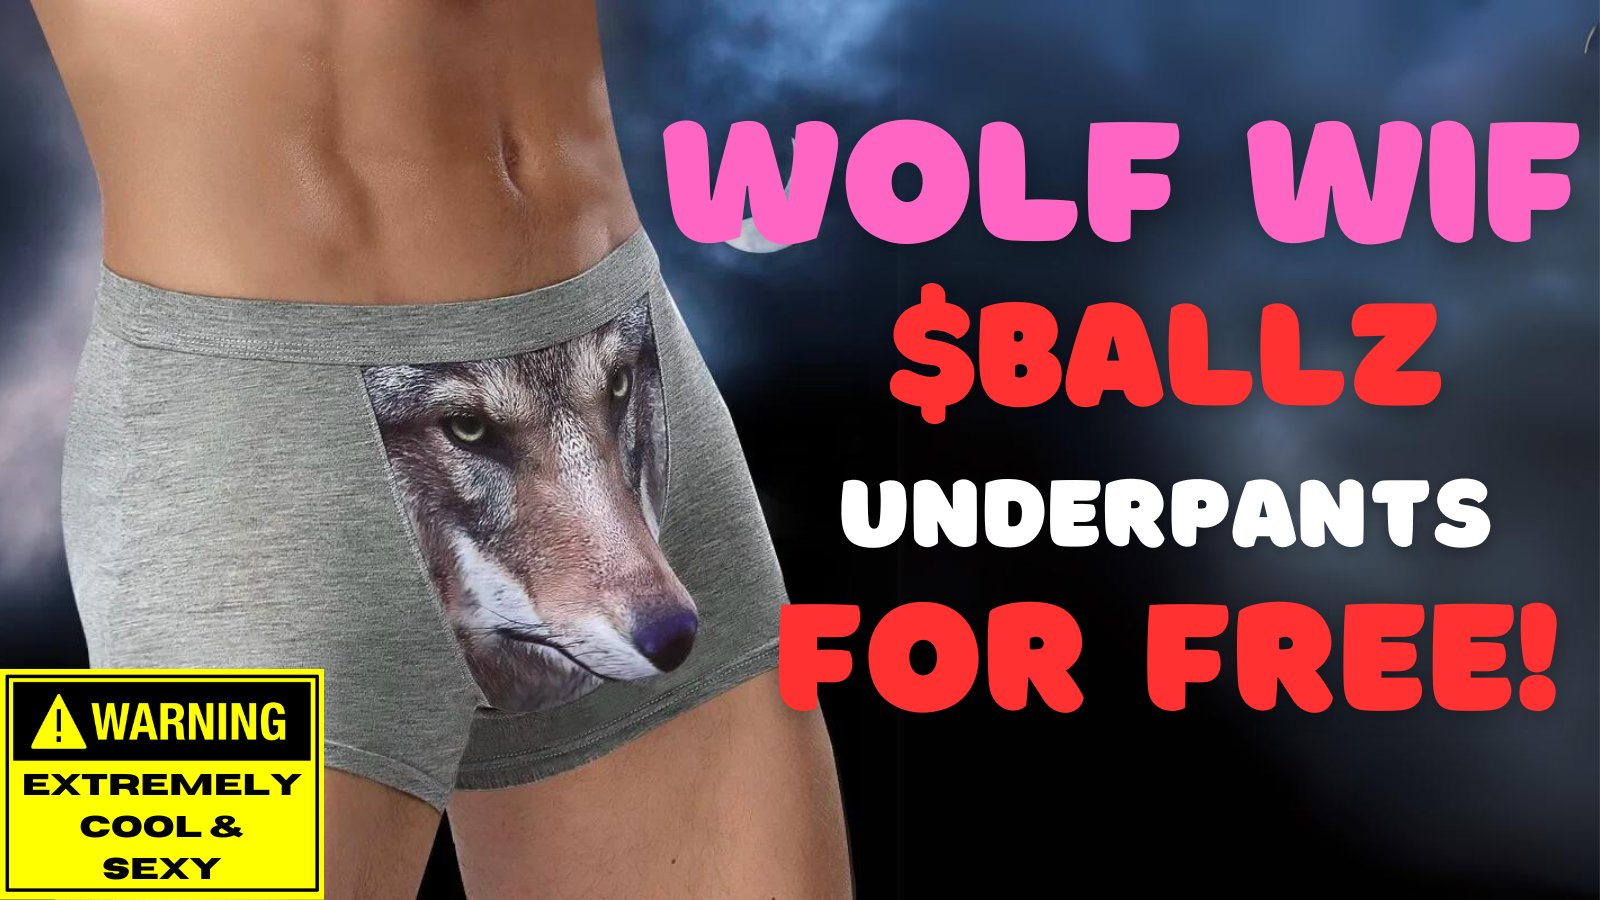 Alex Mason 👁△ on X: Get Wolf Wif $BALLZ underpants for free! Celebrating  the Wolf Wif Ballz success, I am giving away Extremely cool & sexy  underpants for everyone who got $BALLZ